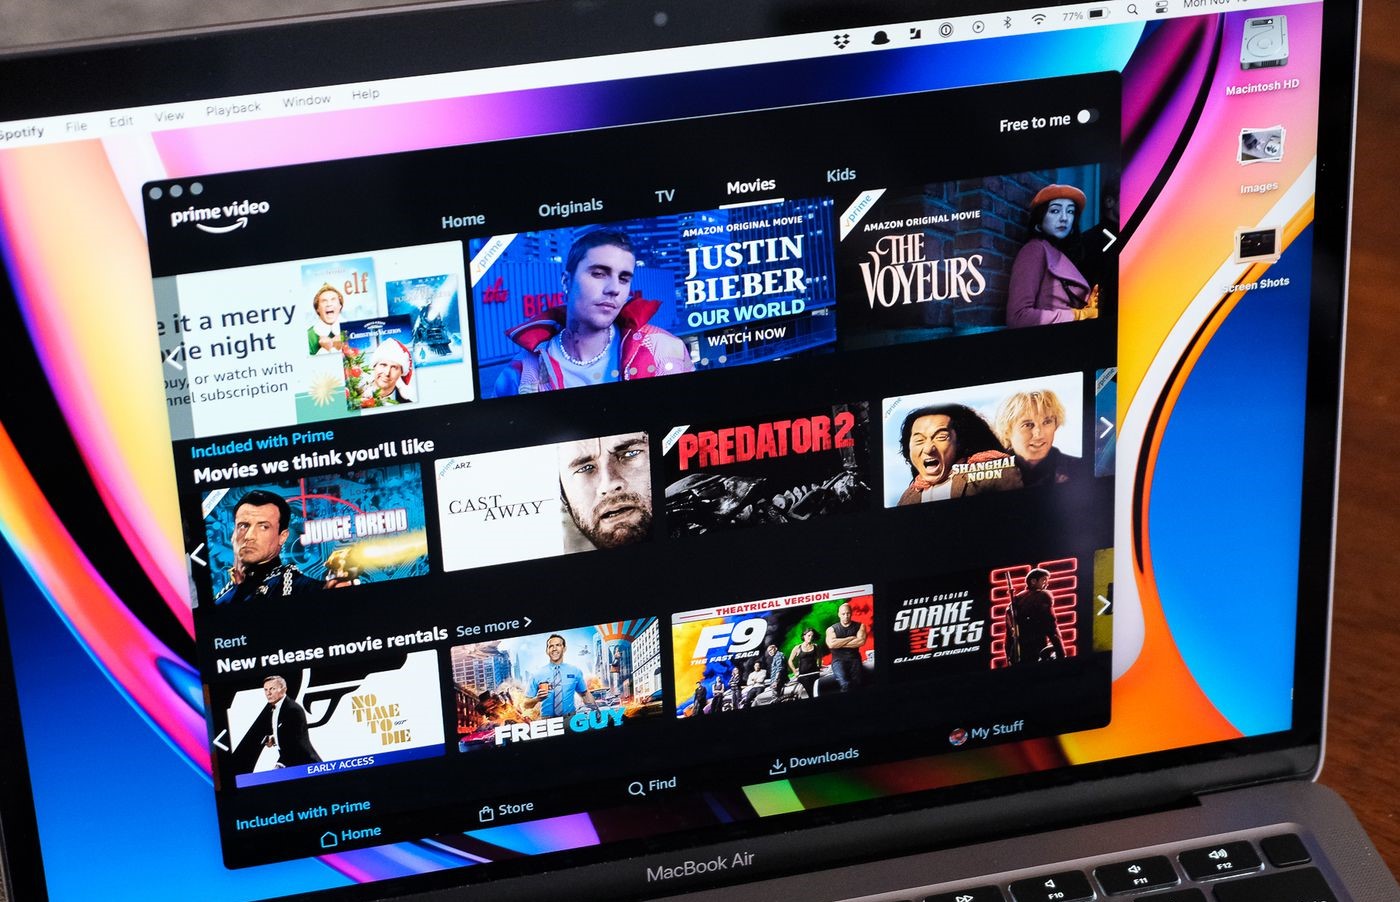 How To Download Movies On Prime Video On Mac